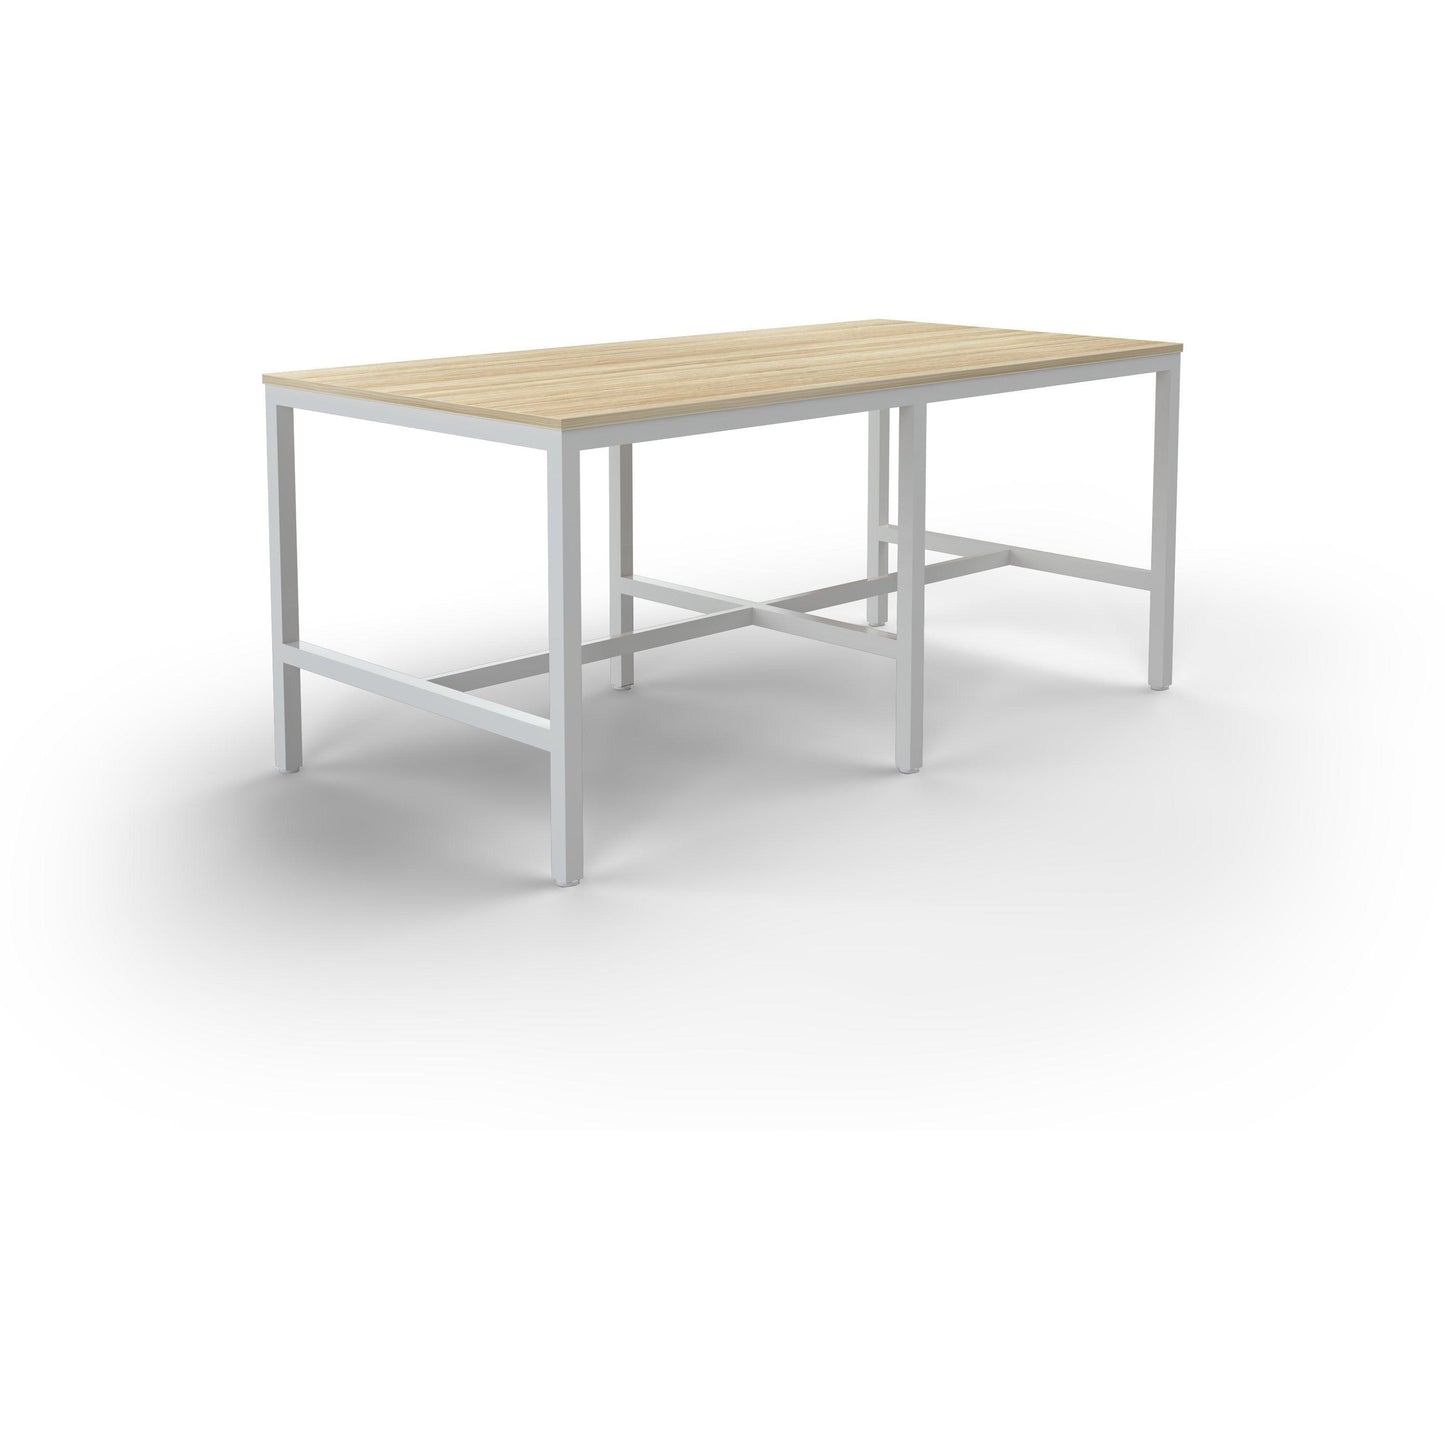 Axis Bar Leaner - Office Furniture Company 